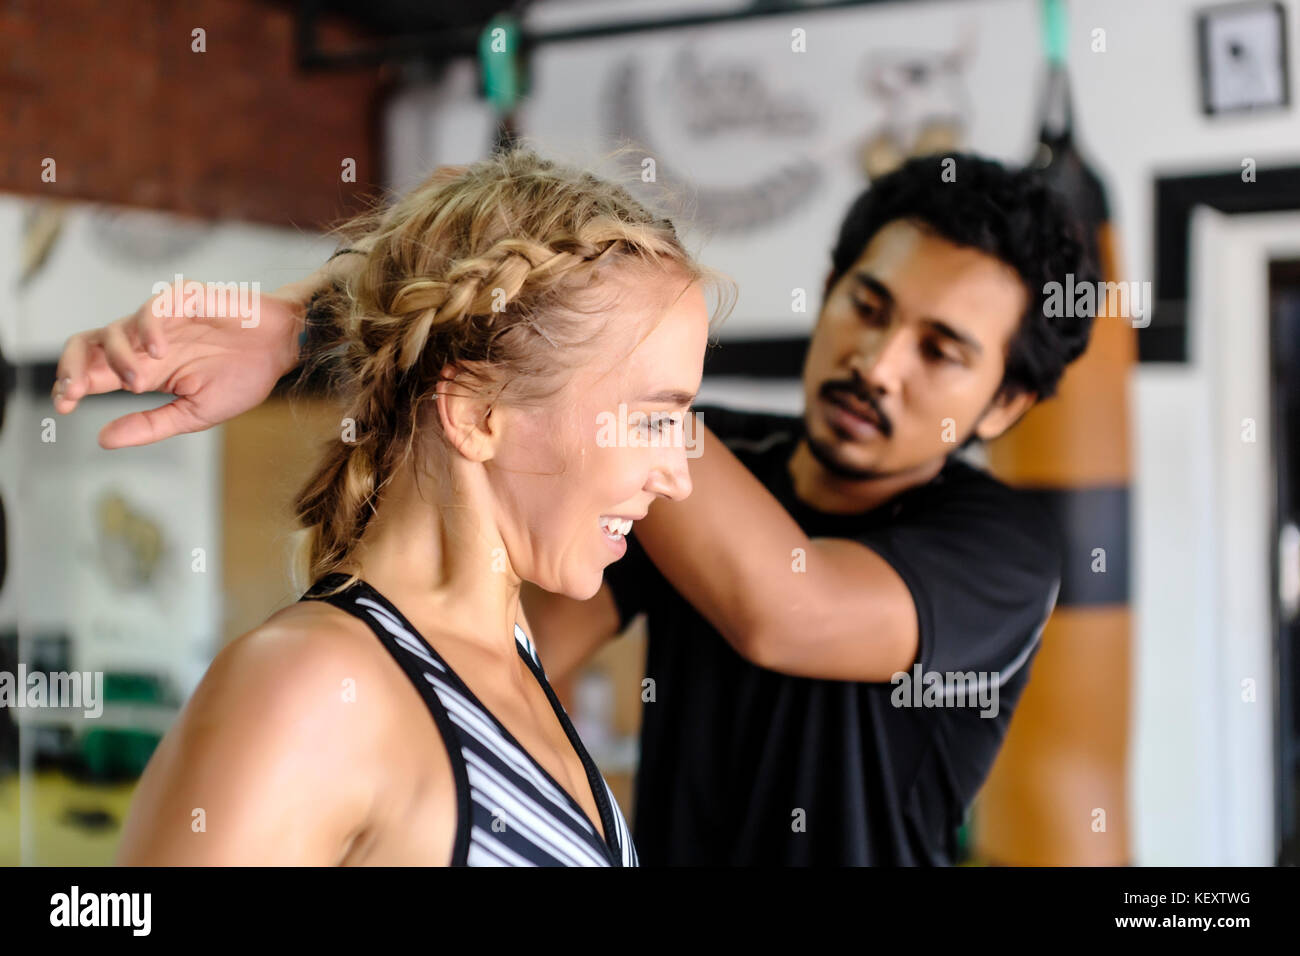 Photograph of young woman getting assistance stretching from trainer in gym, Seminyak, Bali, Indonesia Stock Photo